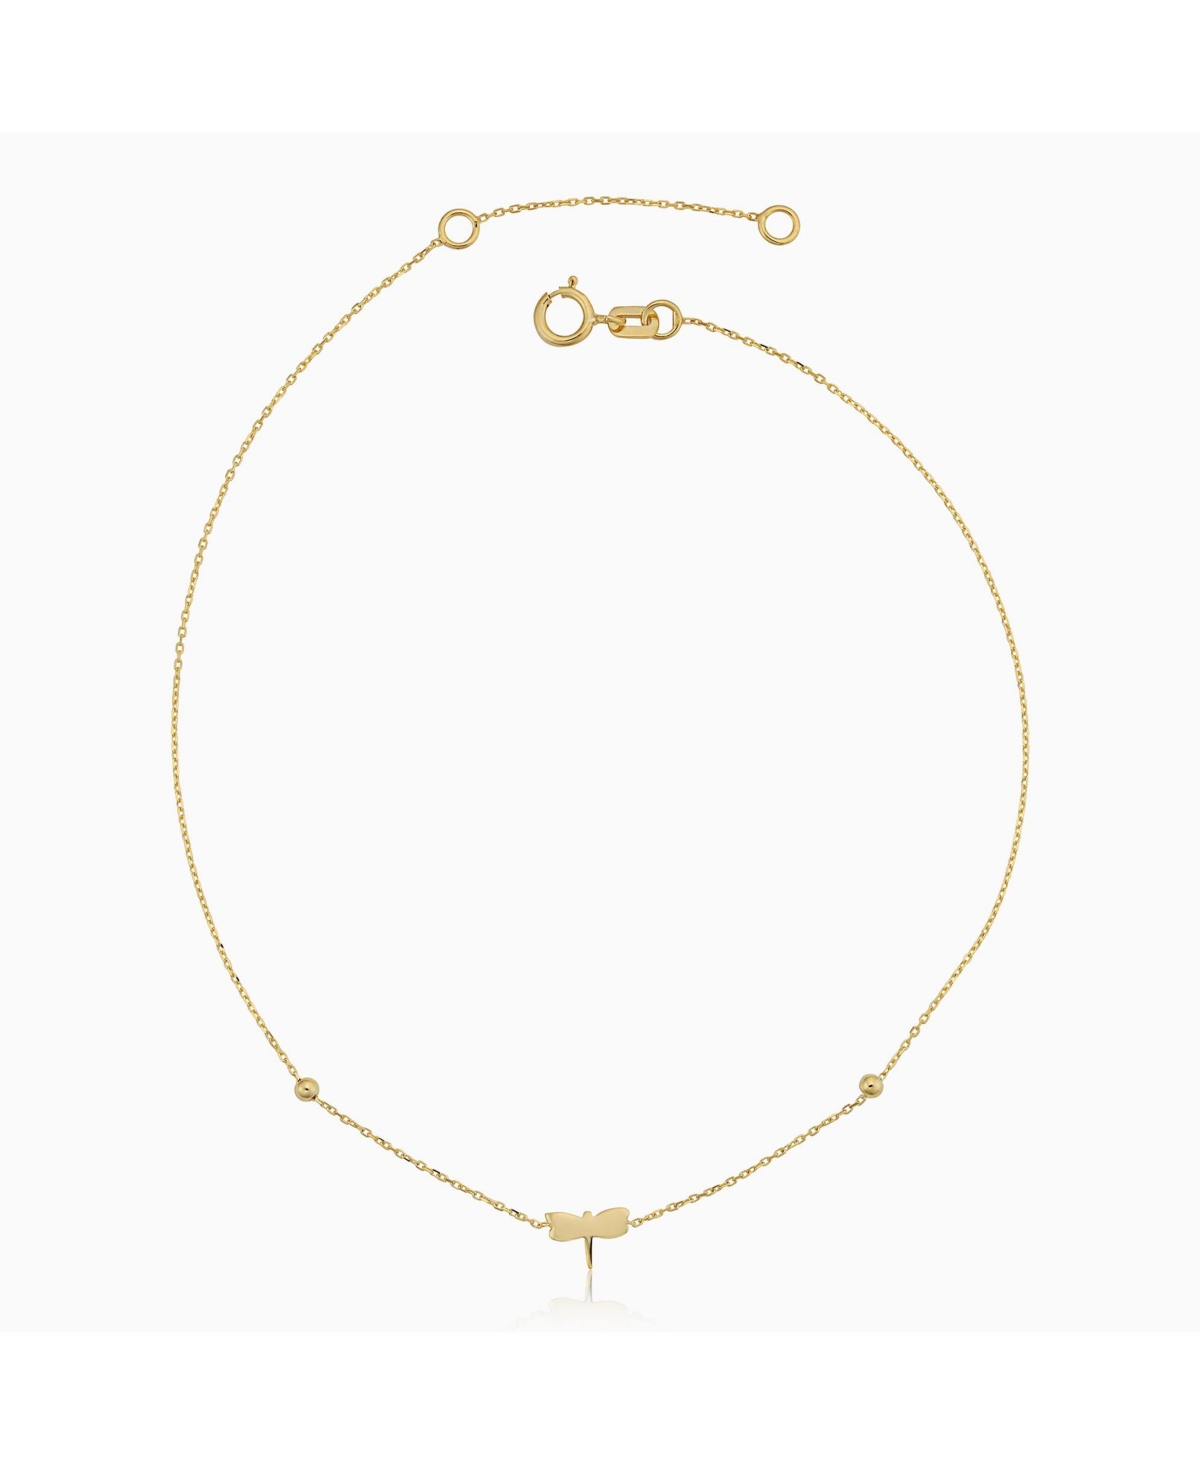 ORADINA FLORA ANKLET 9-10" IN 14K YELLOW GOLD